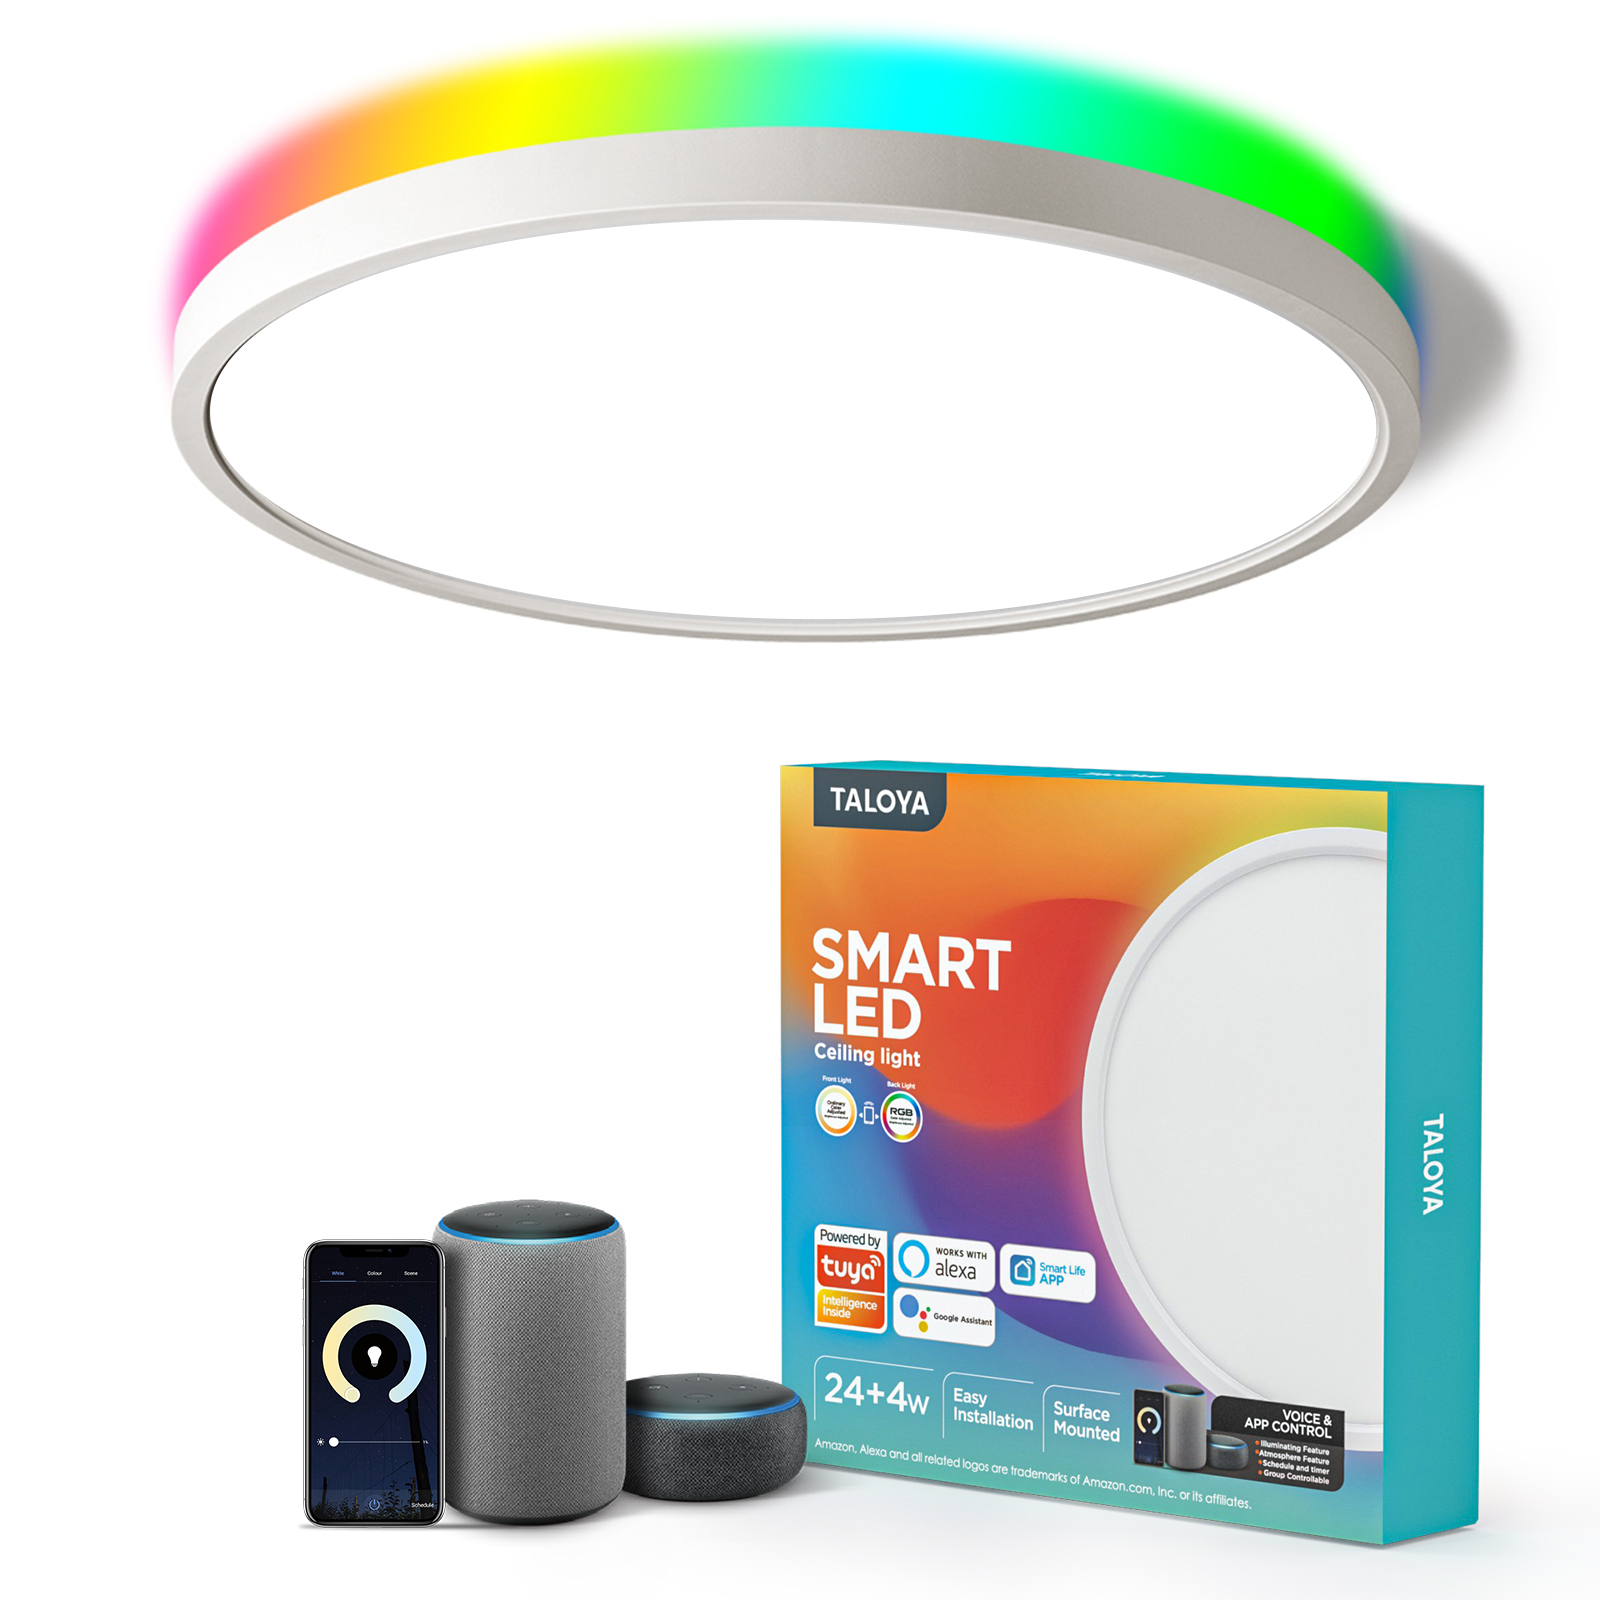 Smart Control Round LED Ceiling Light APP and Remote Control Work with Ph Alexa Google assistant